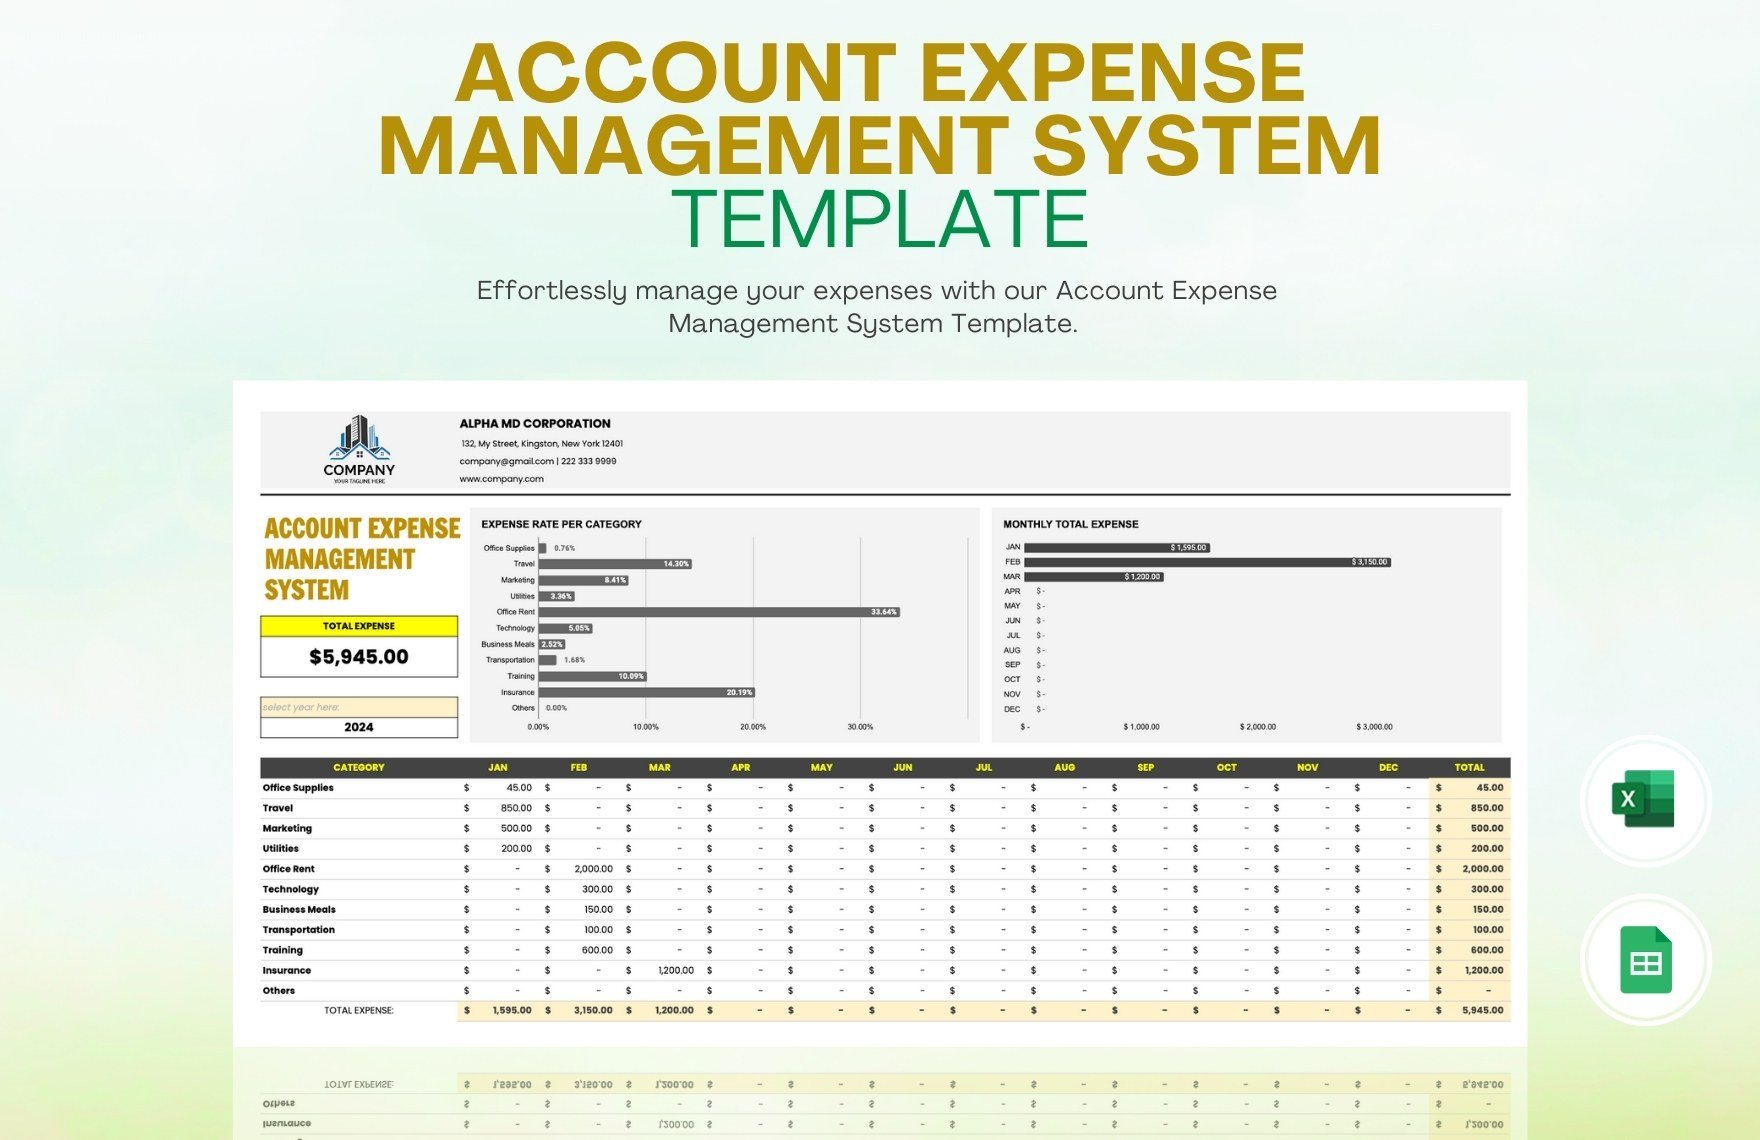 Account Expense Management System Template in Excel, Google Sheets